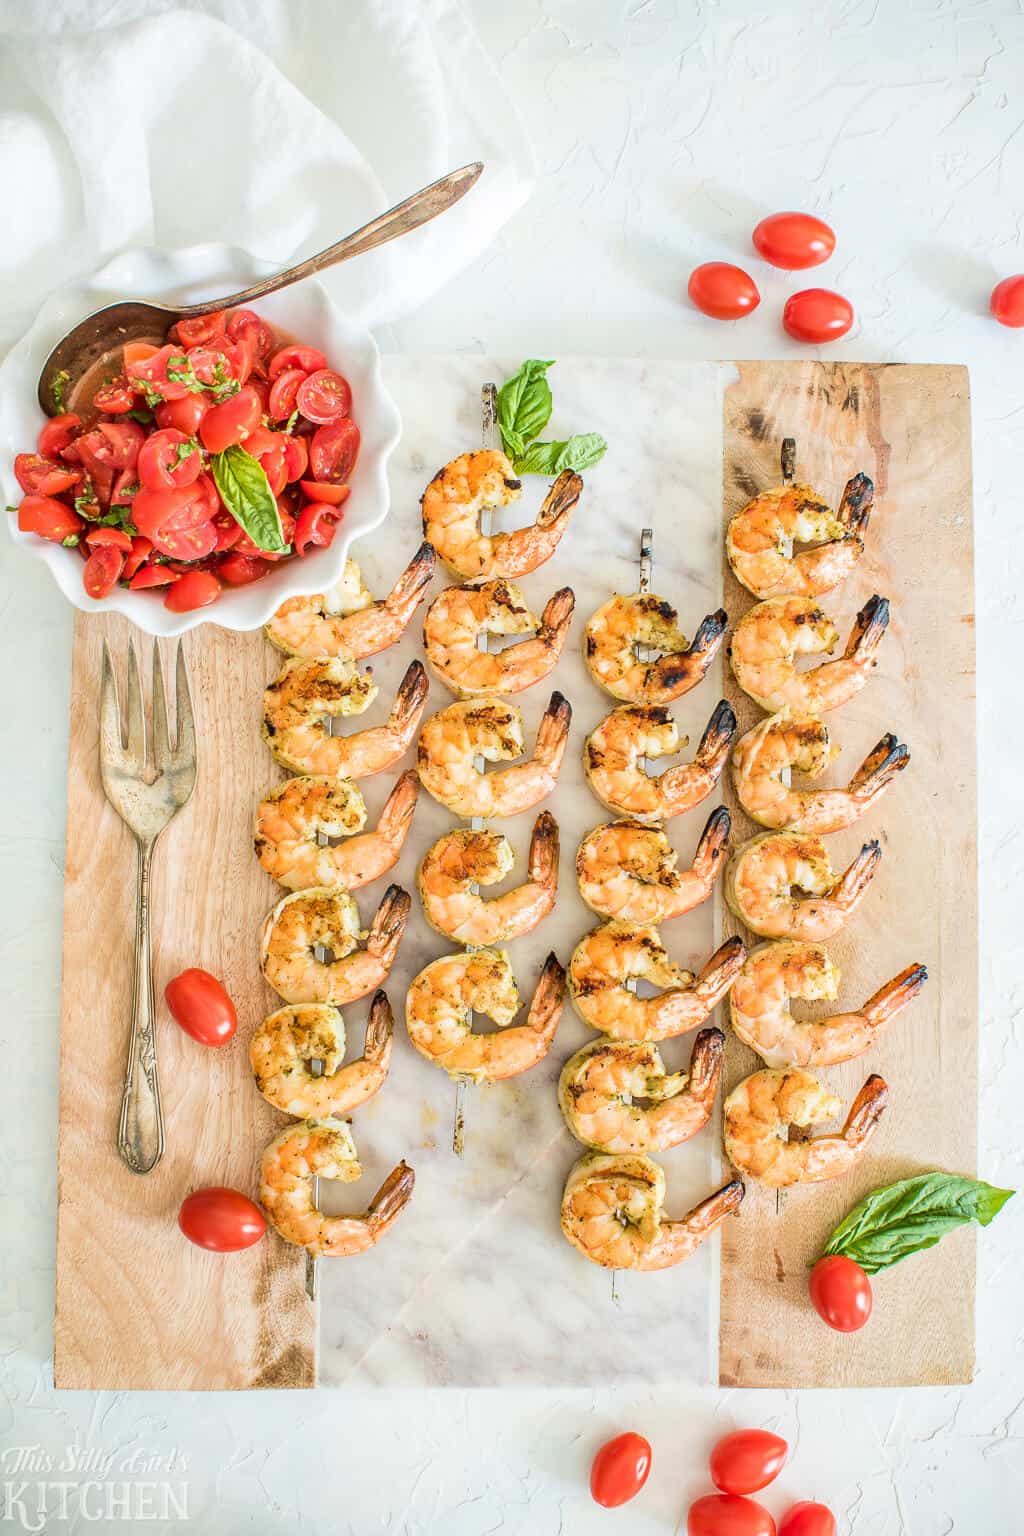 Shrimp Skewers with a bowl of Bruschetta on side